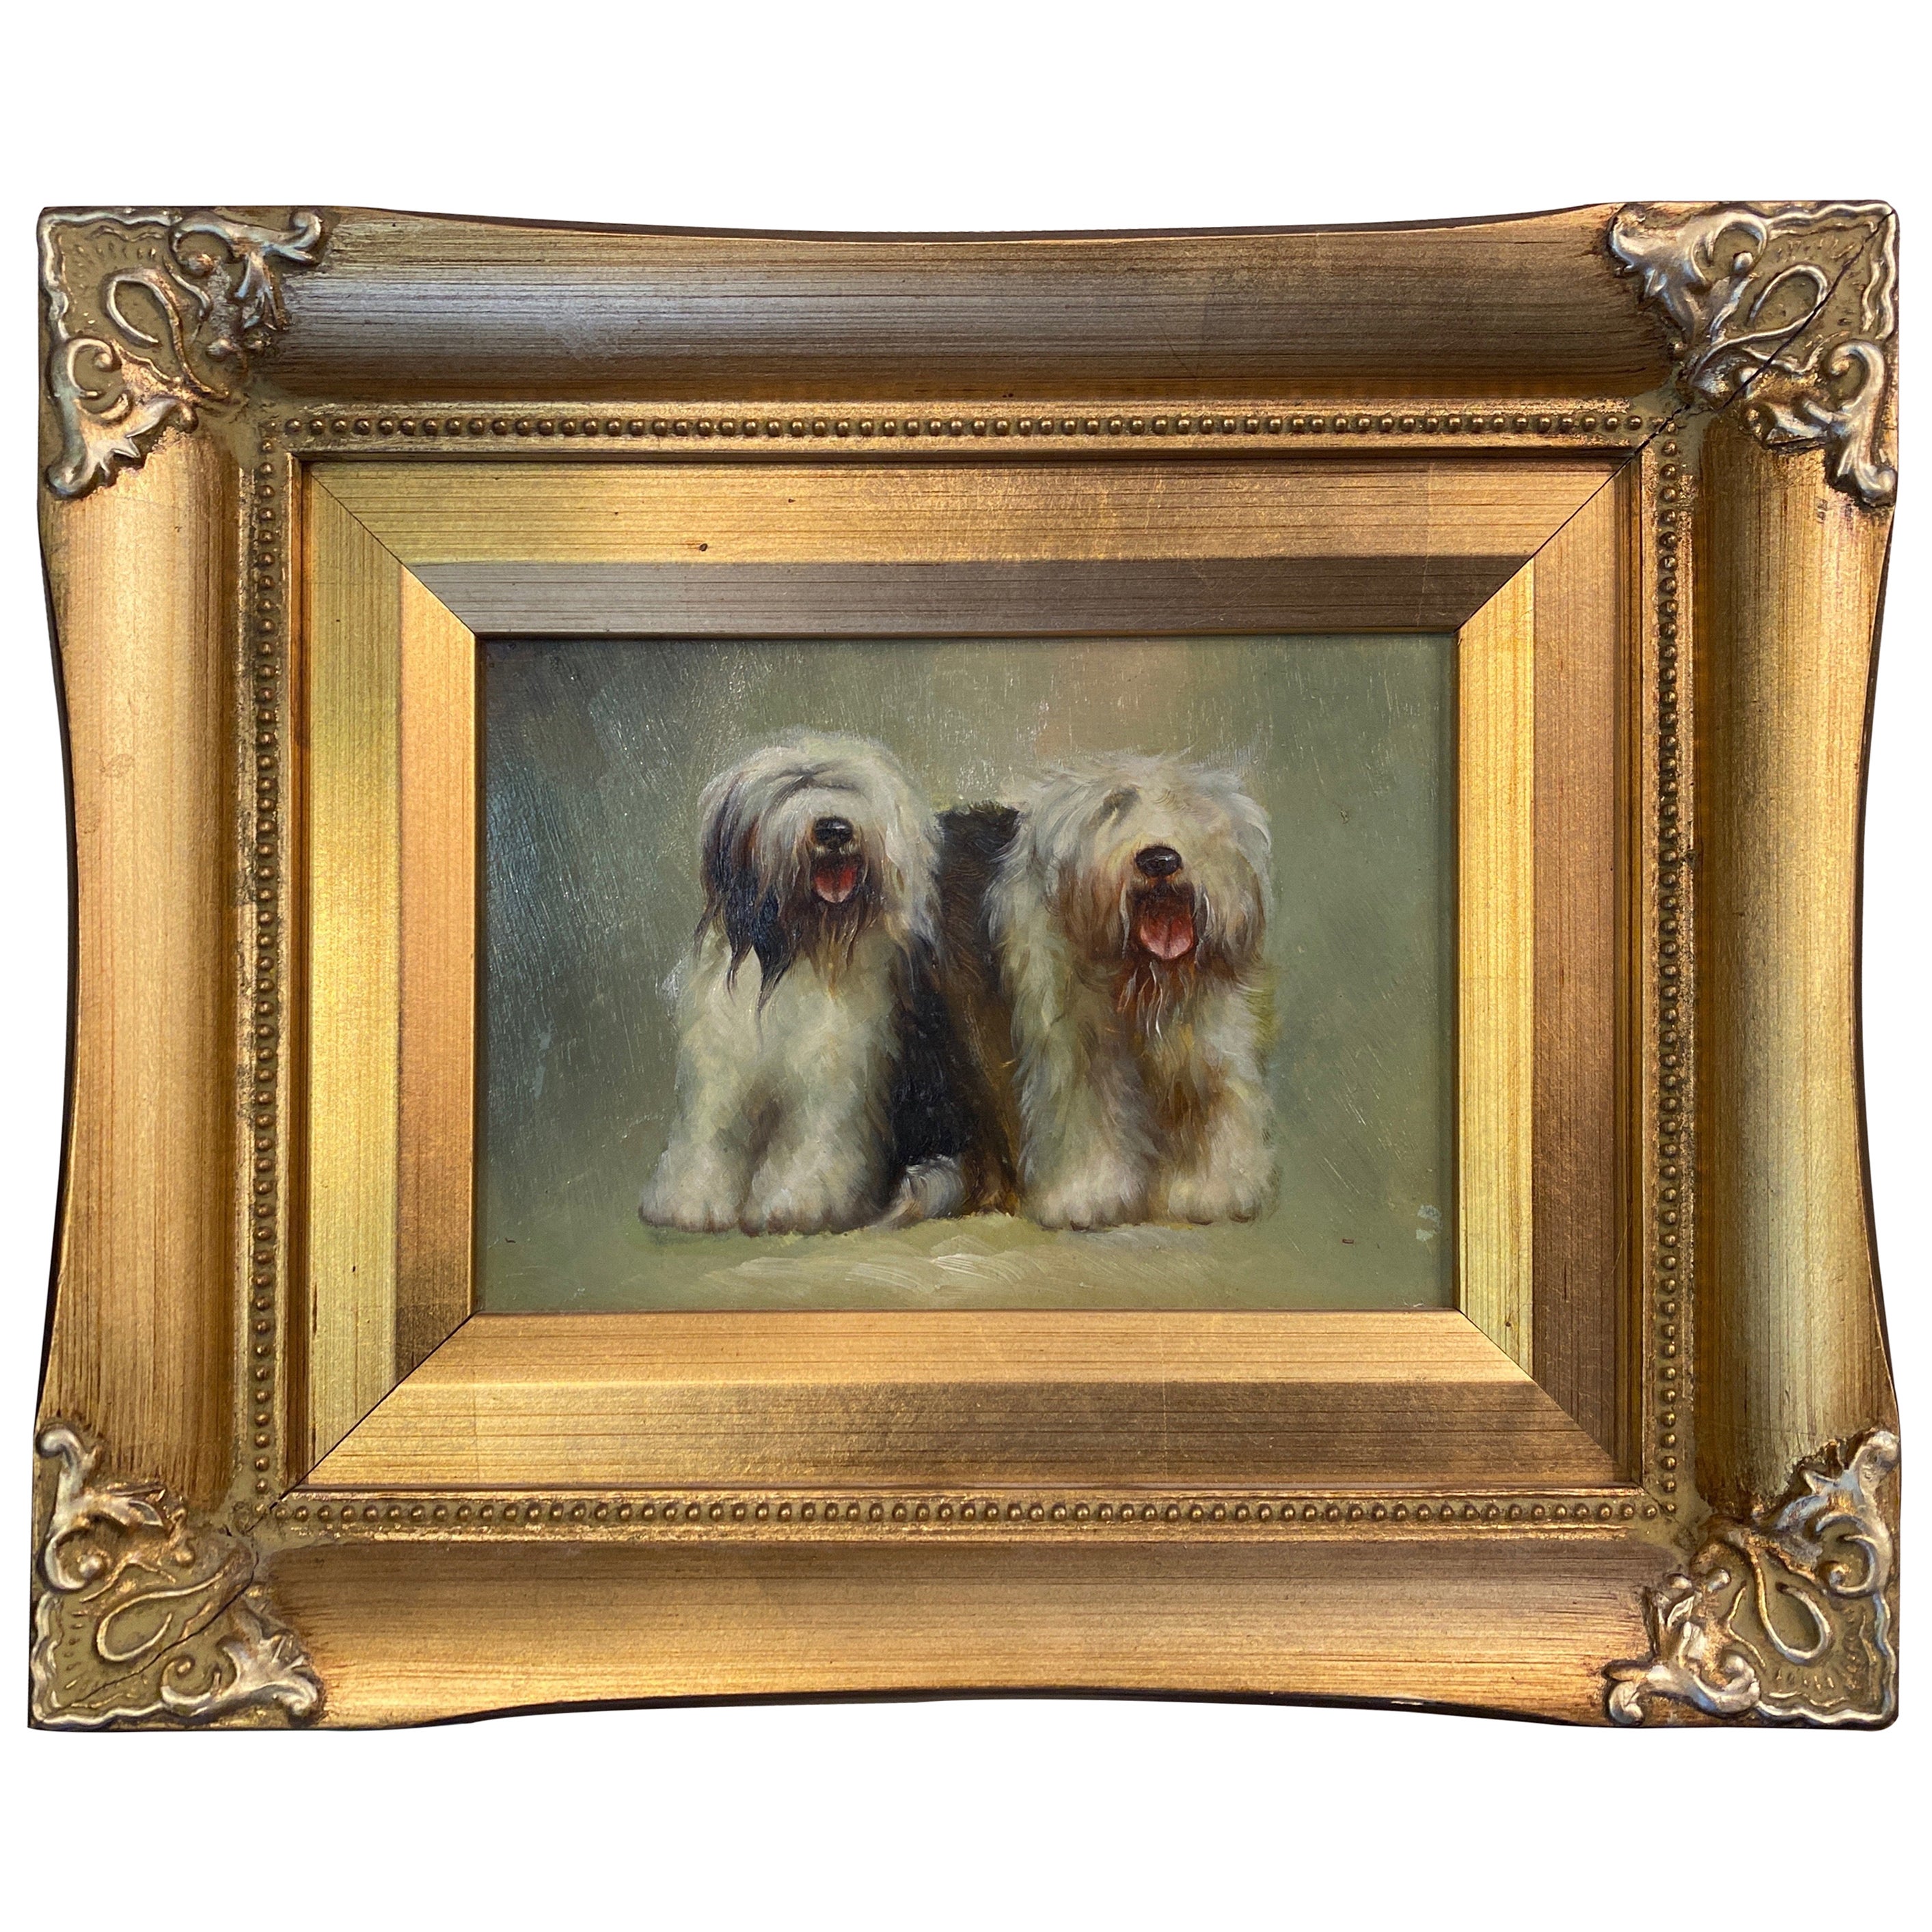 Original Oil Painting on Board of English Sheep Dogs